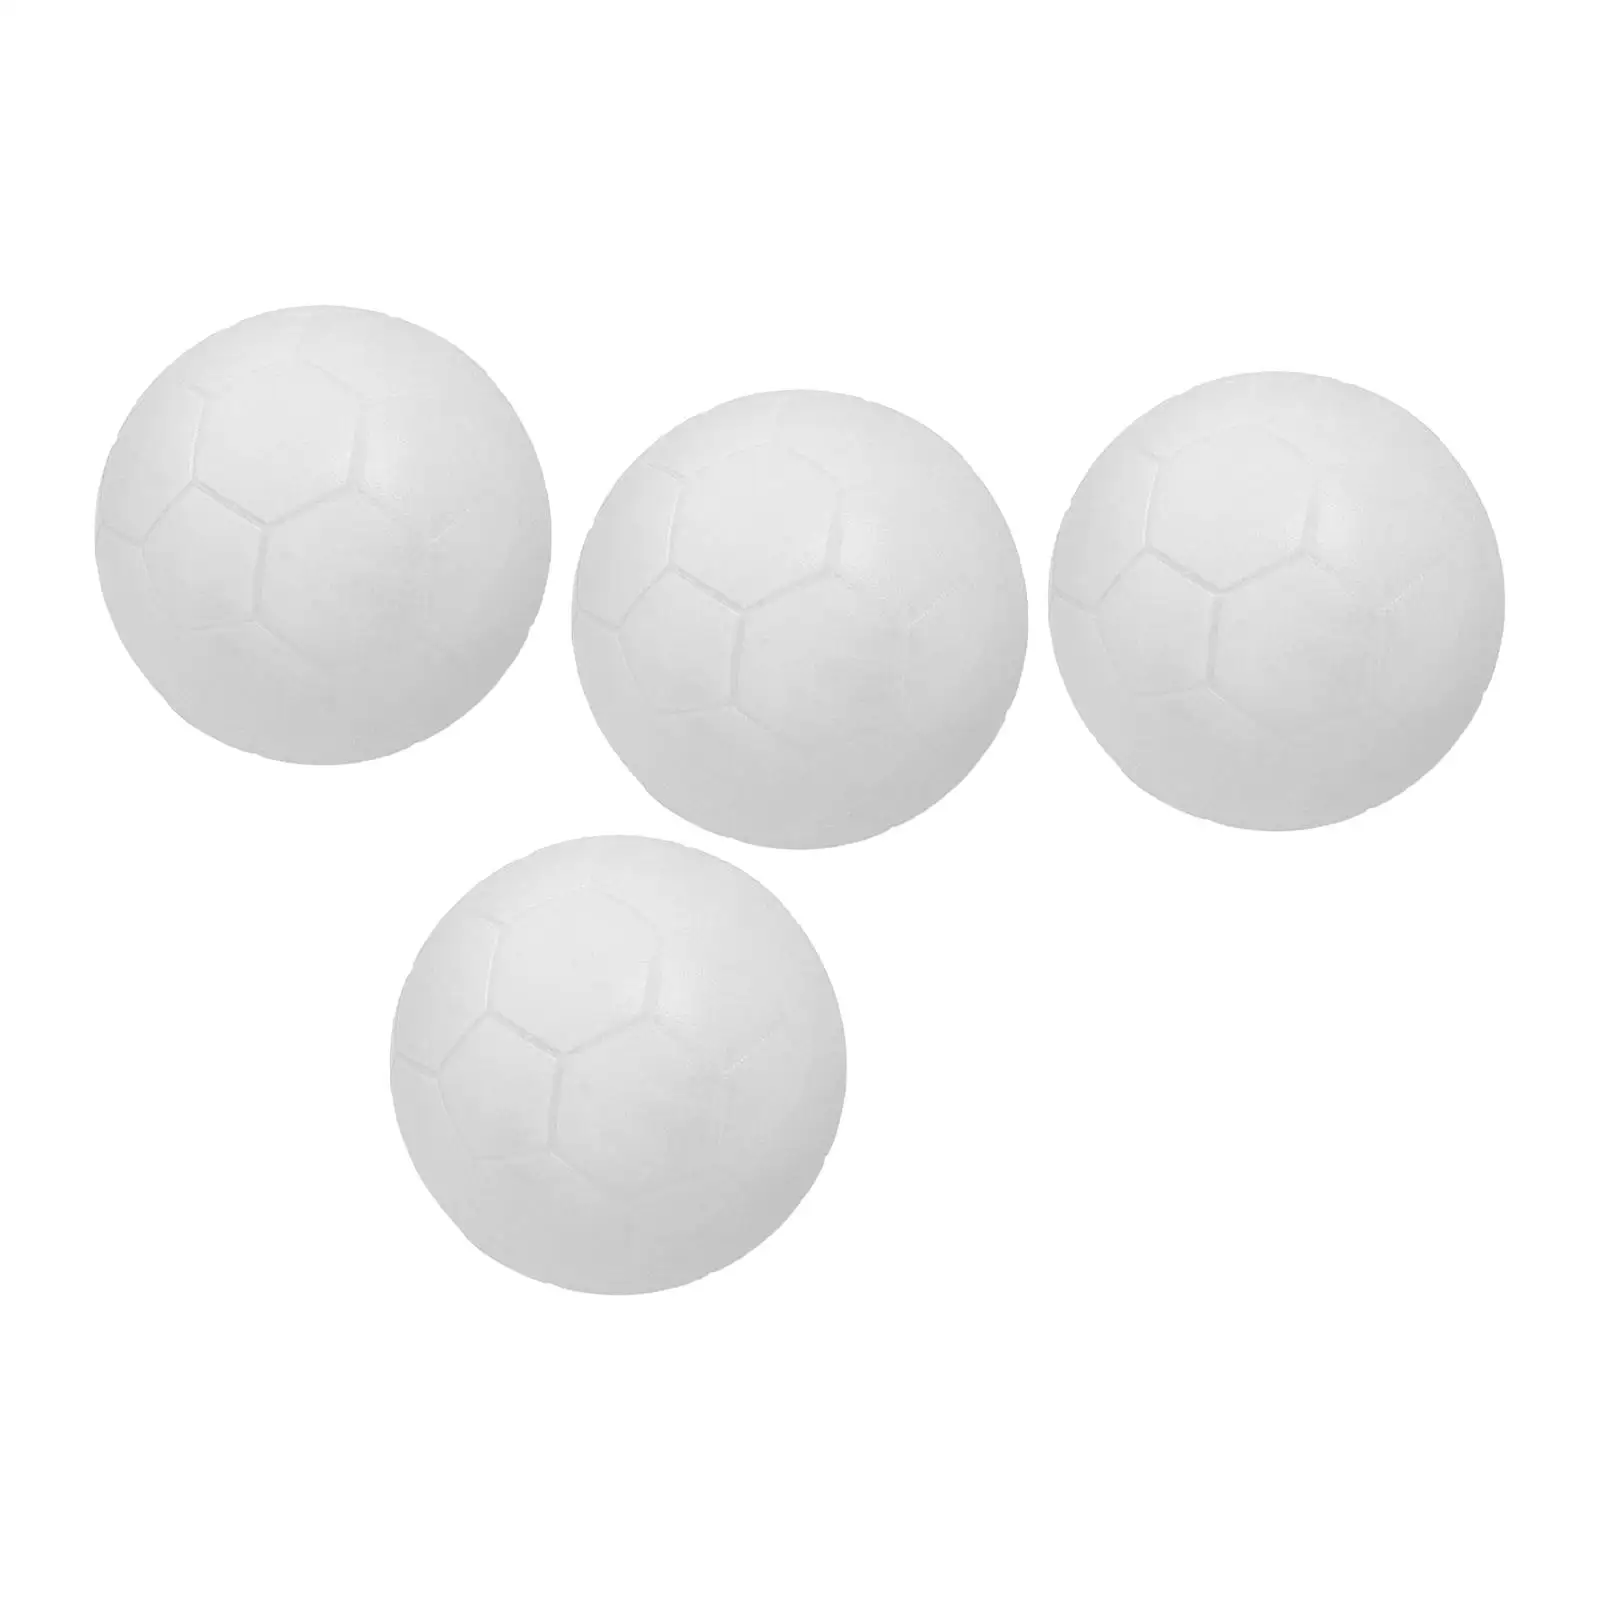 4Pcs Durable Table Soccer Balls 36mm Foosball Balls Solid White Tabletop Game PP